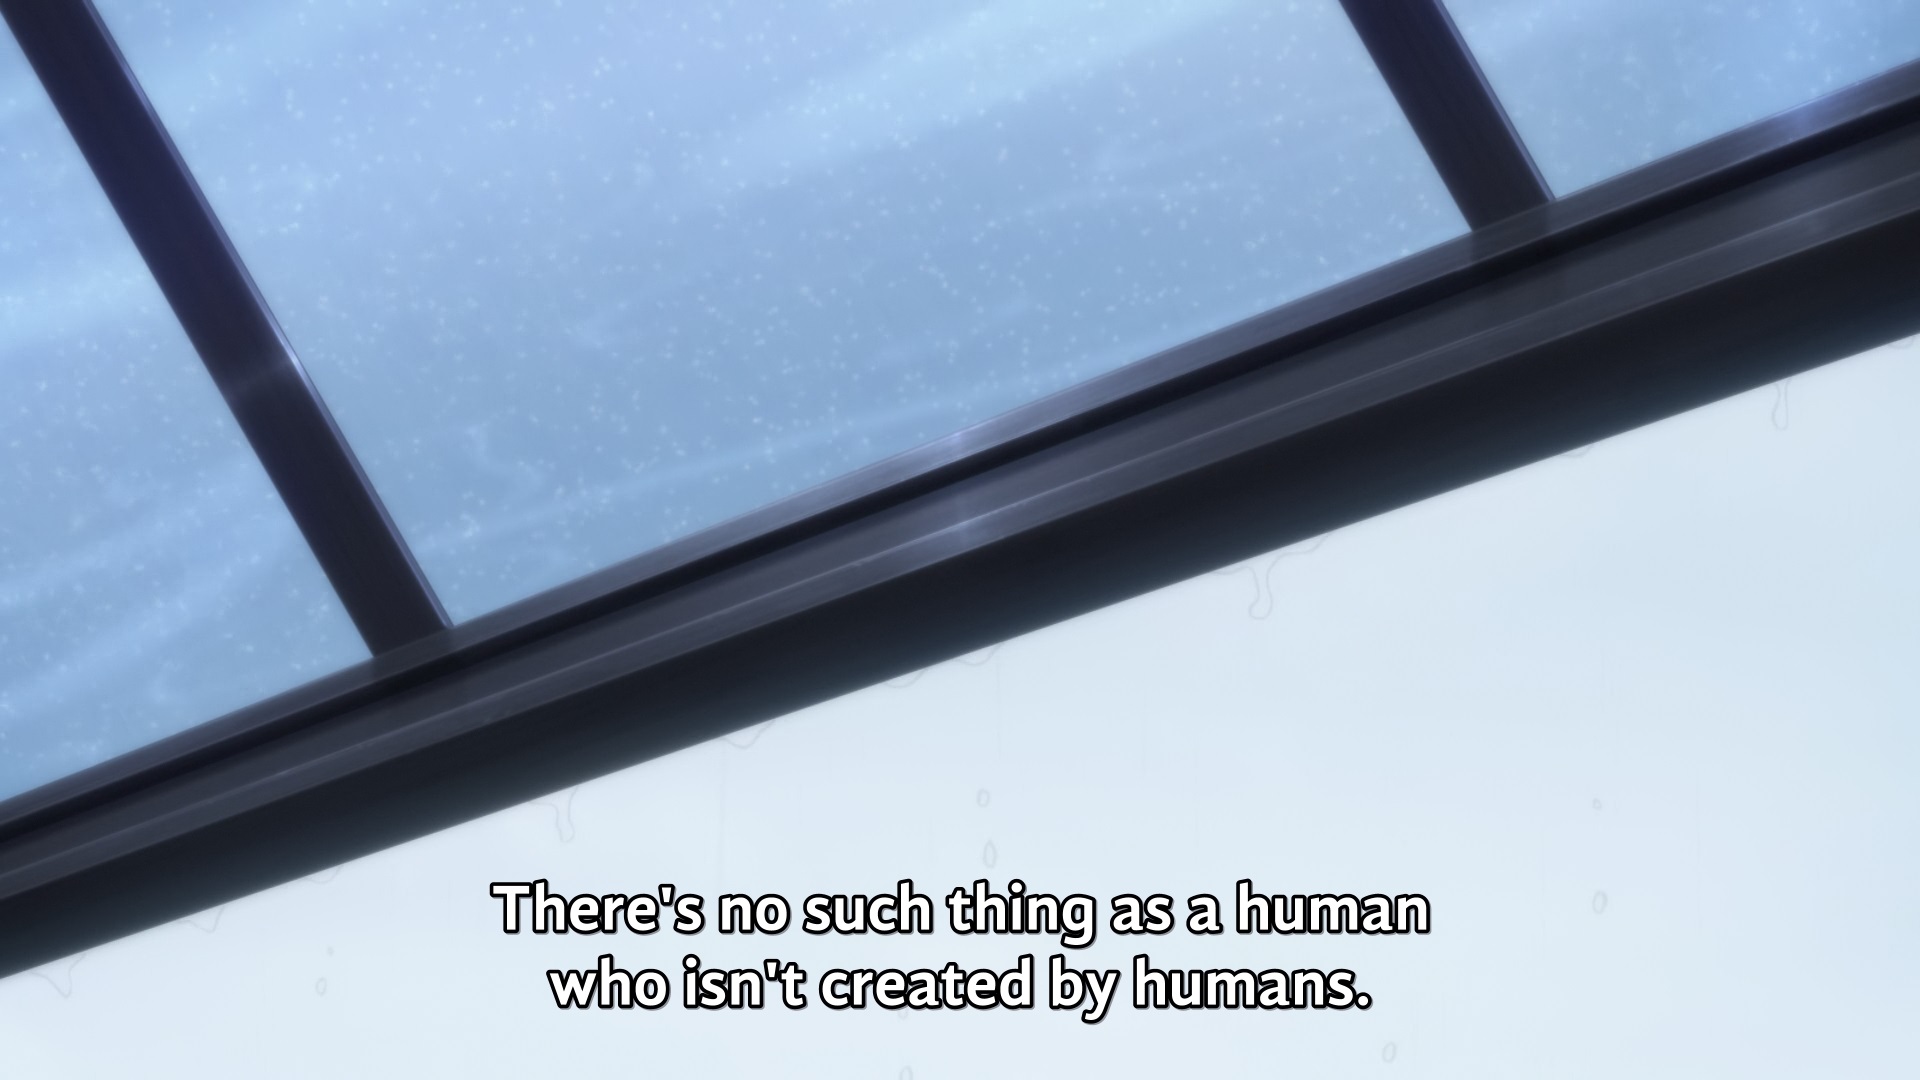 "There's no such thing as a human who isn't created by humans."